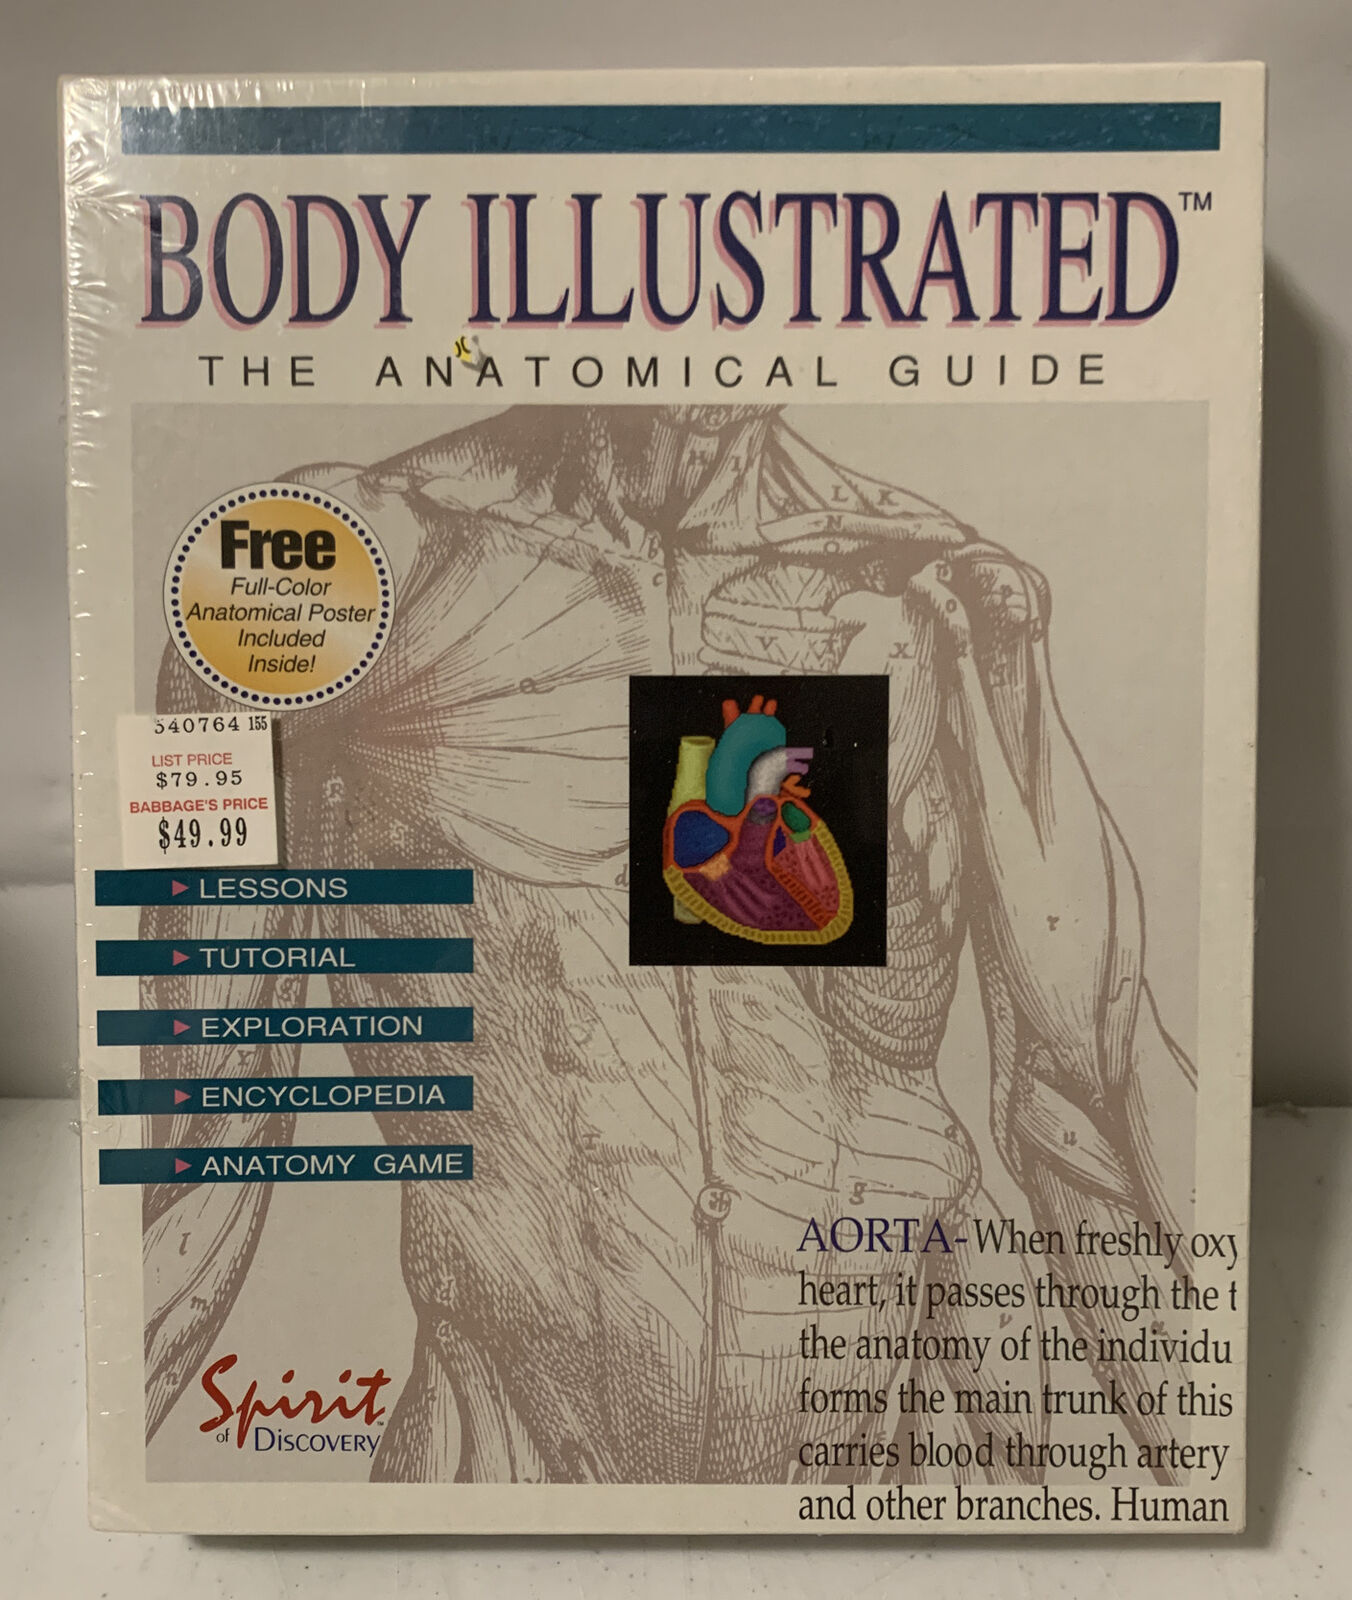 Body Illustrated The Anatomcal Guide 1992 Vintage PC Disks Learn Anatomy BO400